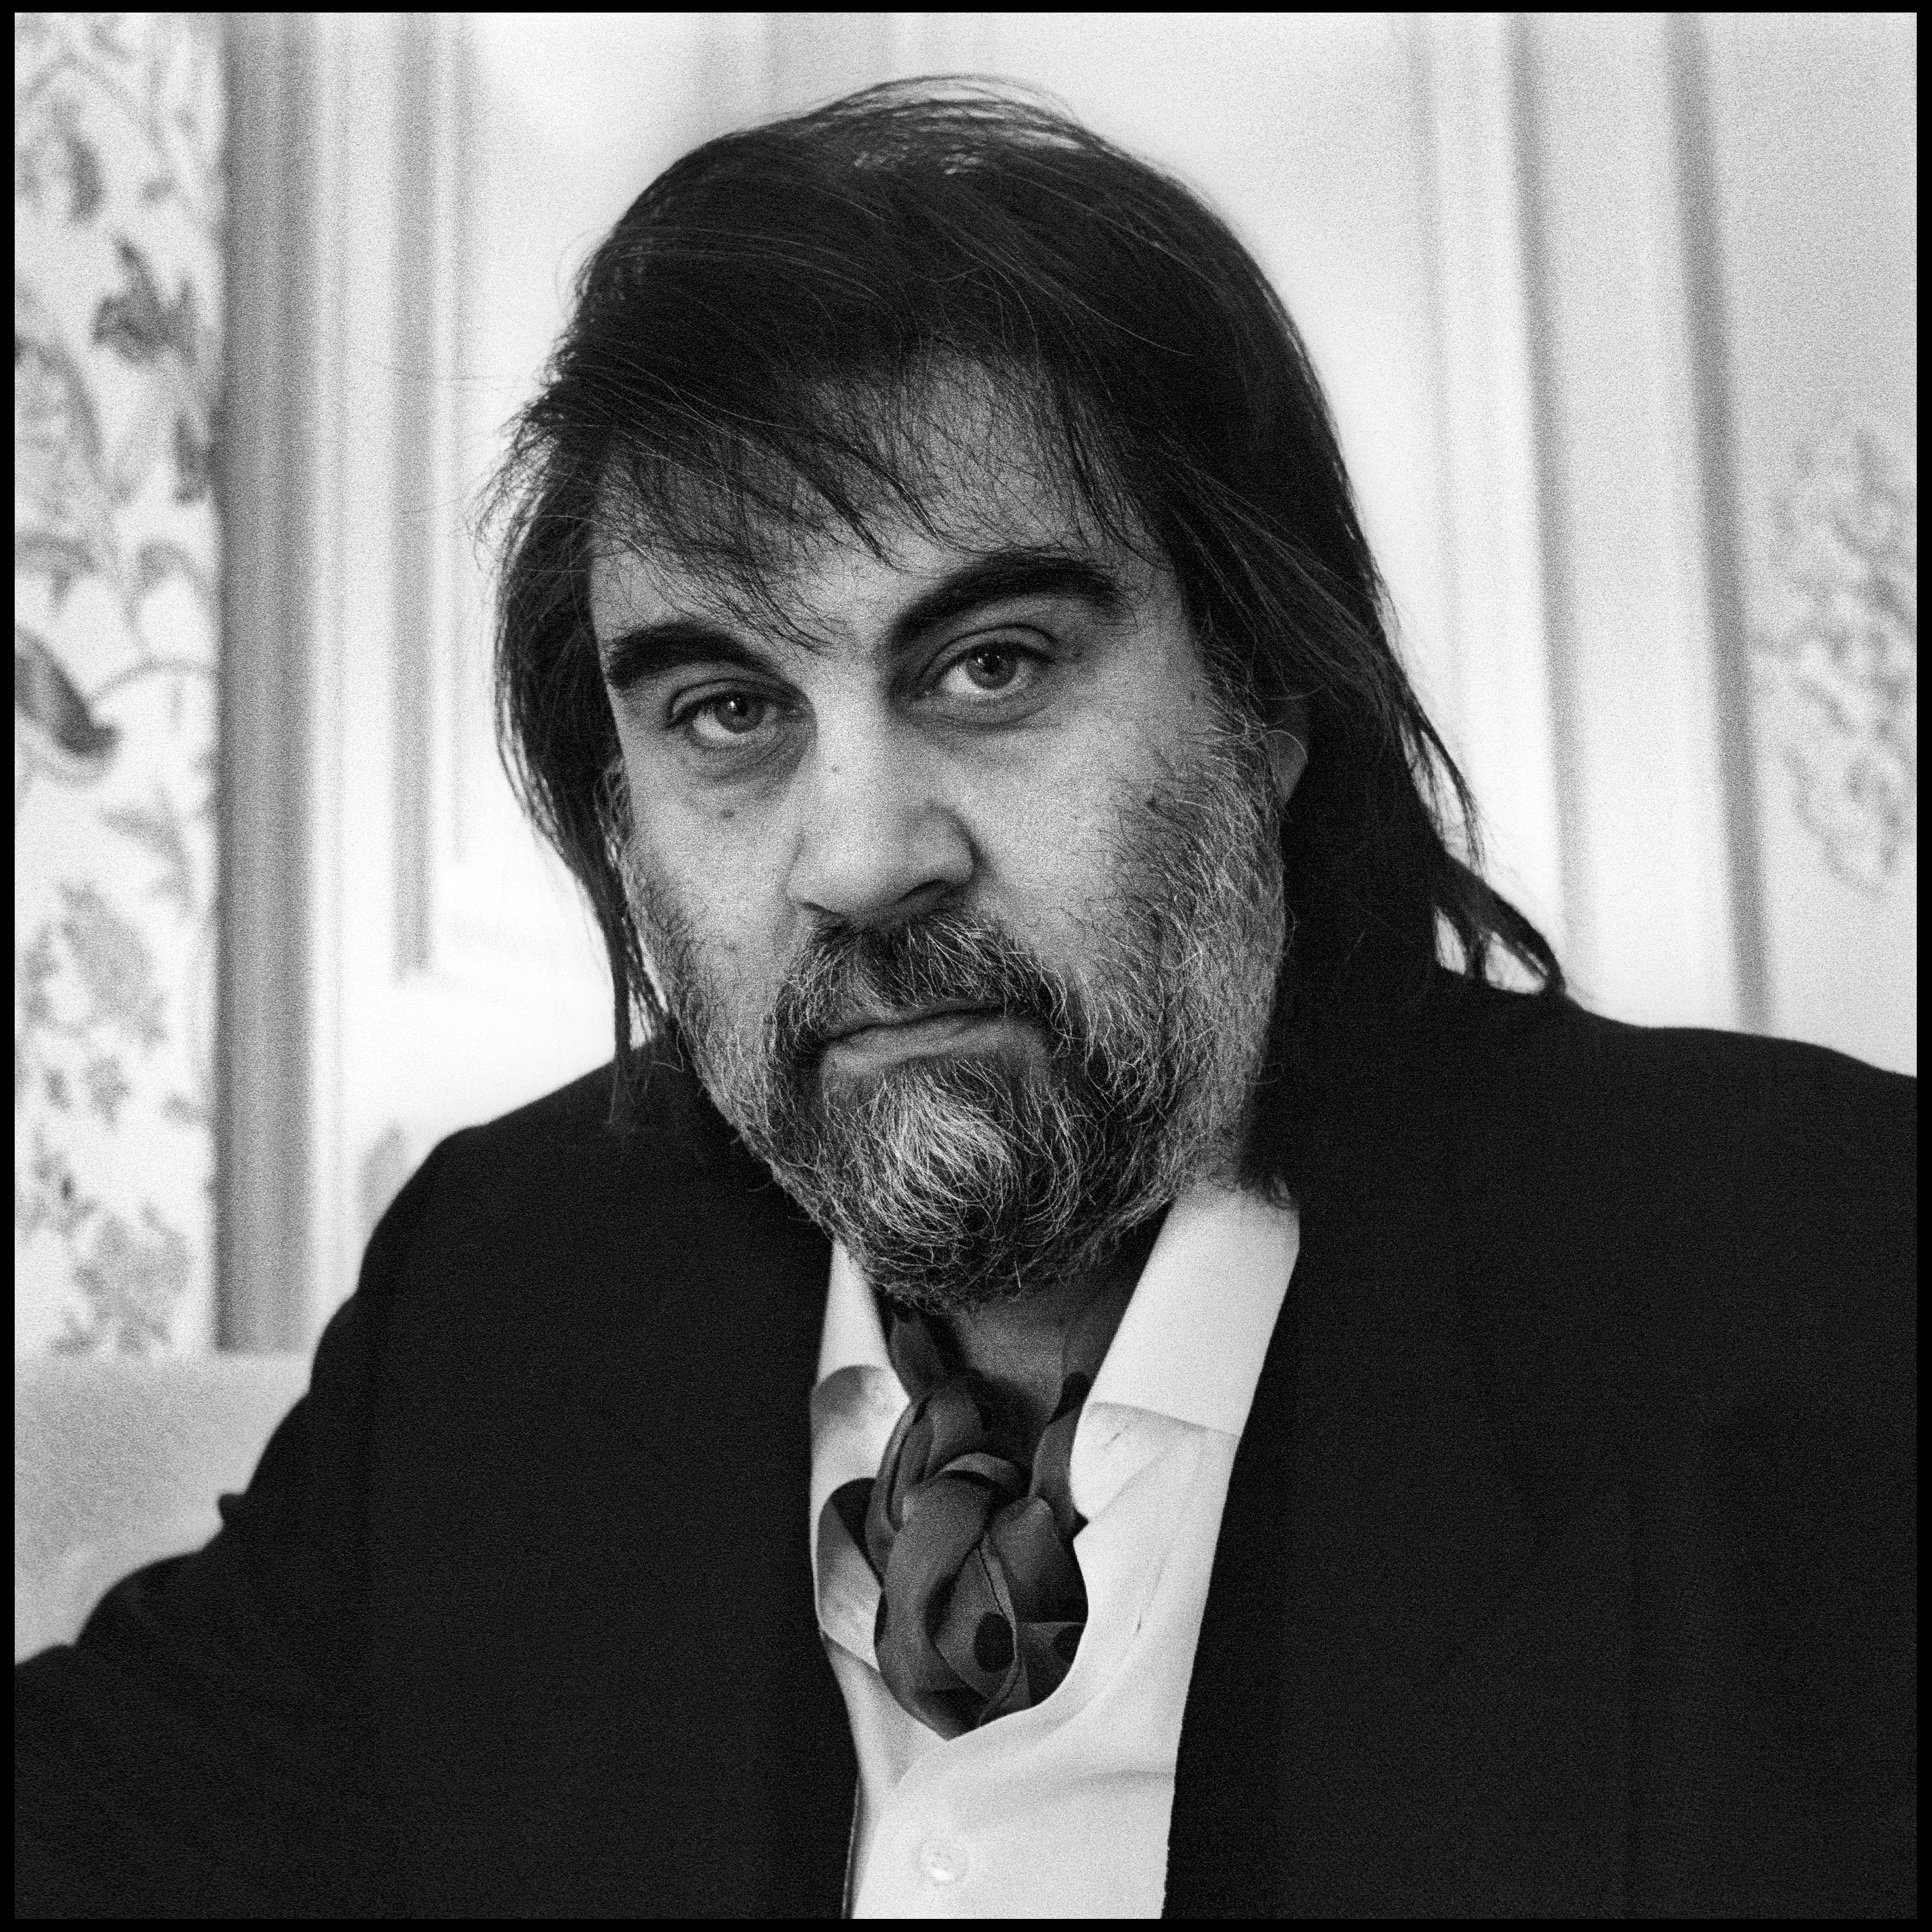 Greek composer and keyboard player Vangelis poses at his apartment in Paris, 9th June 1991 | Source: Getty Images